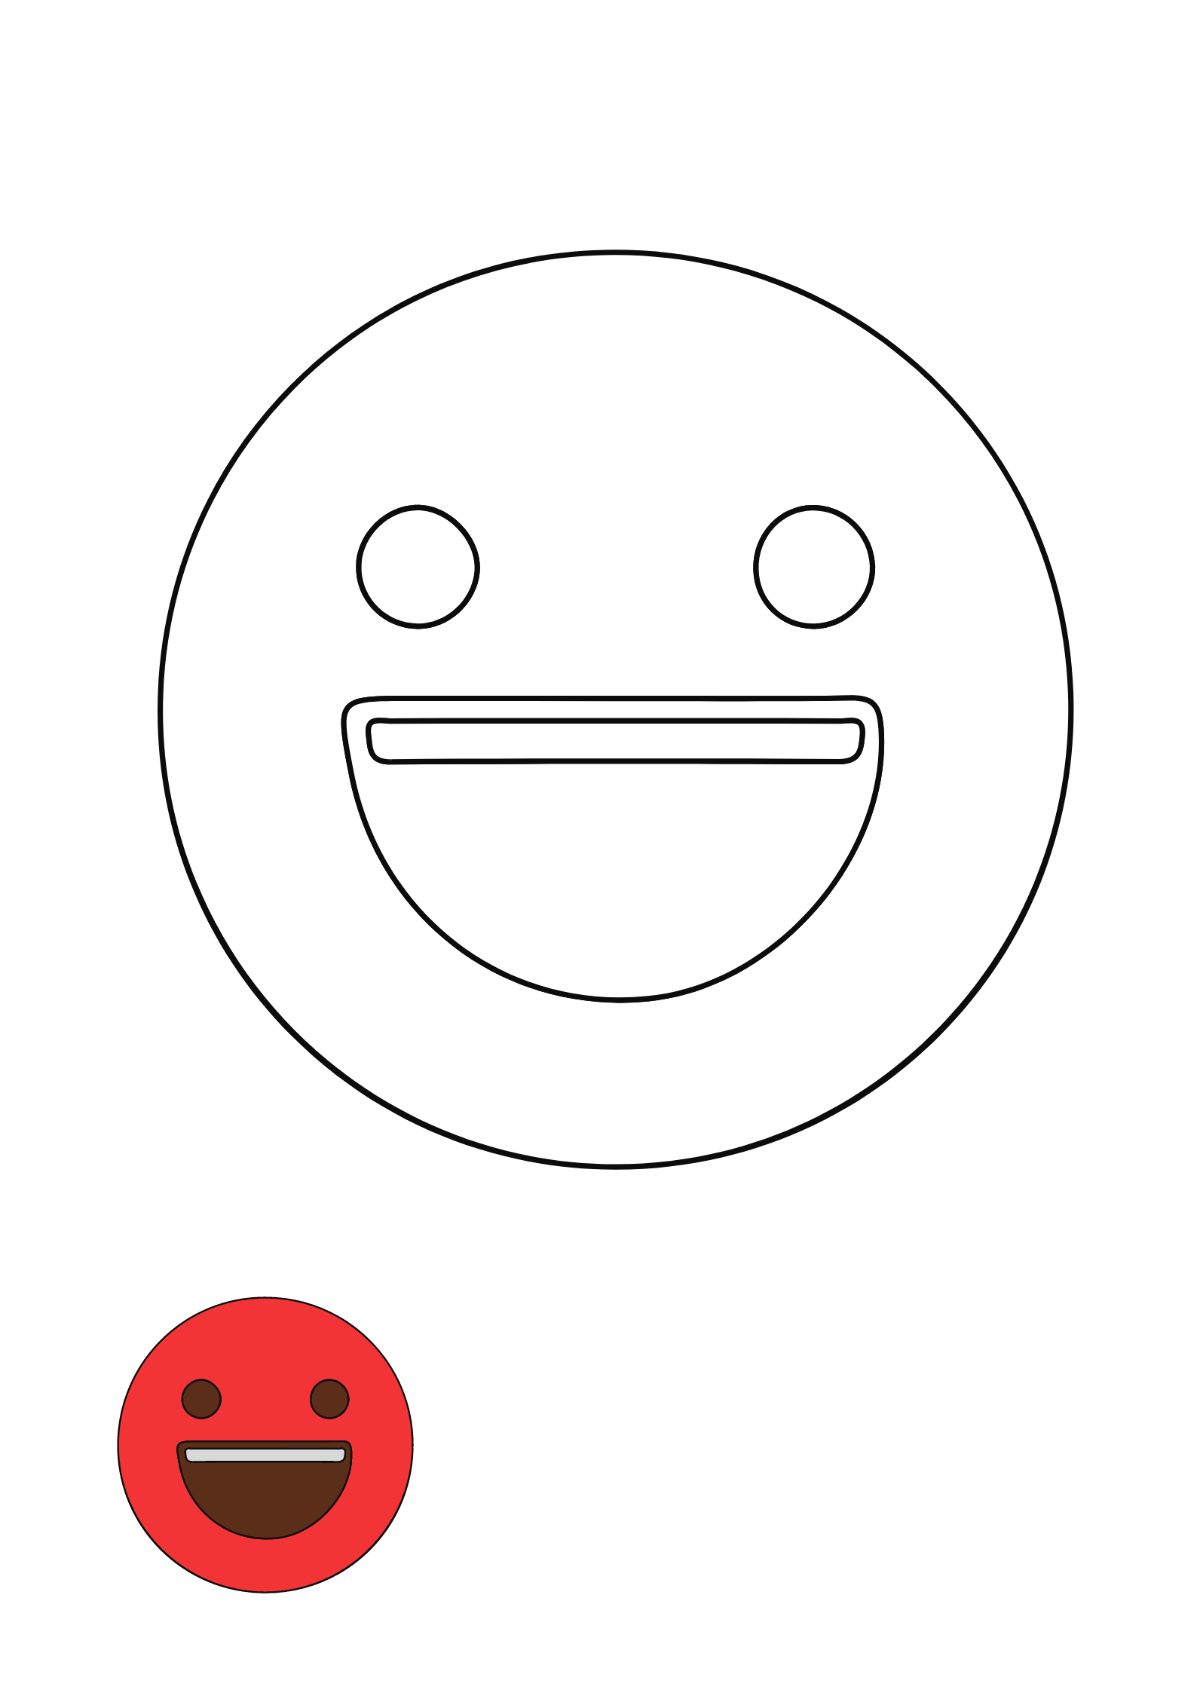 Red Smiley coloring page Template